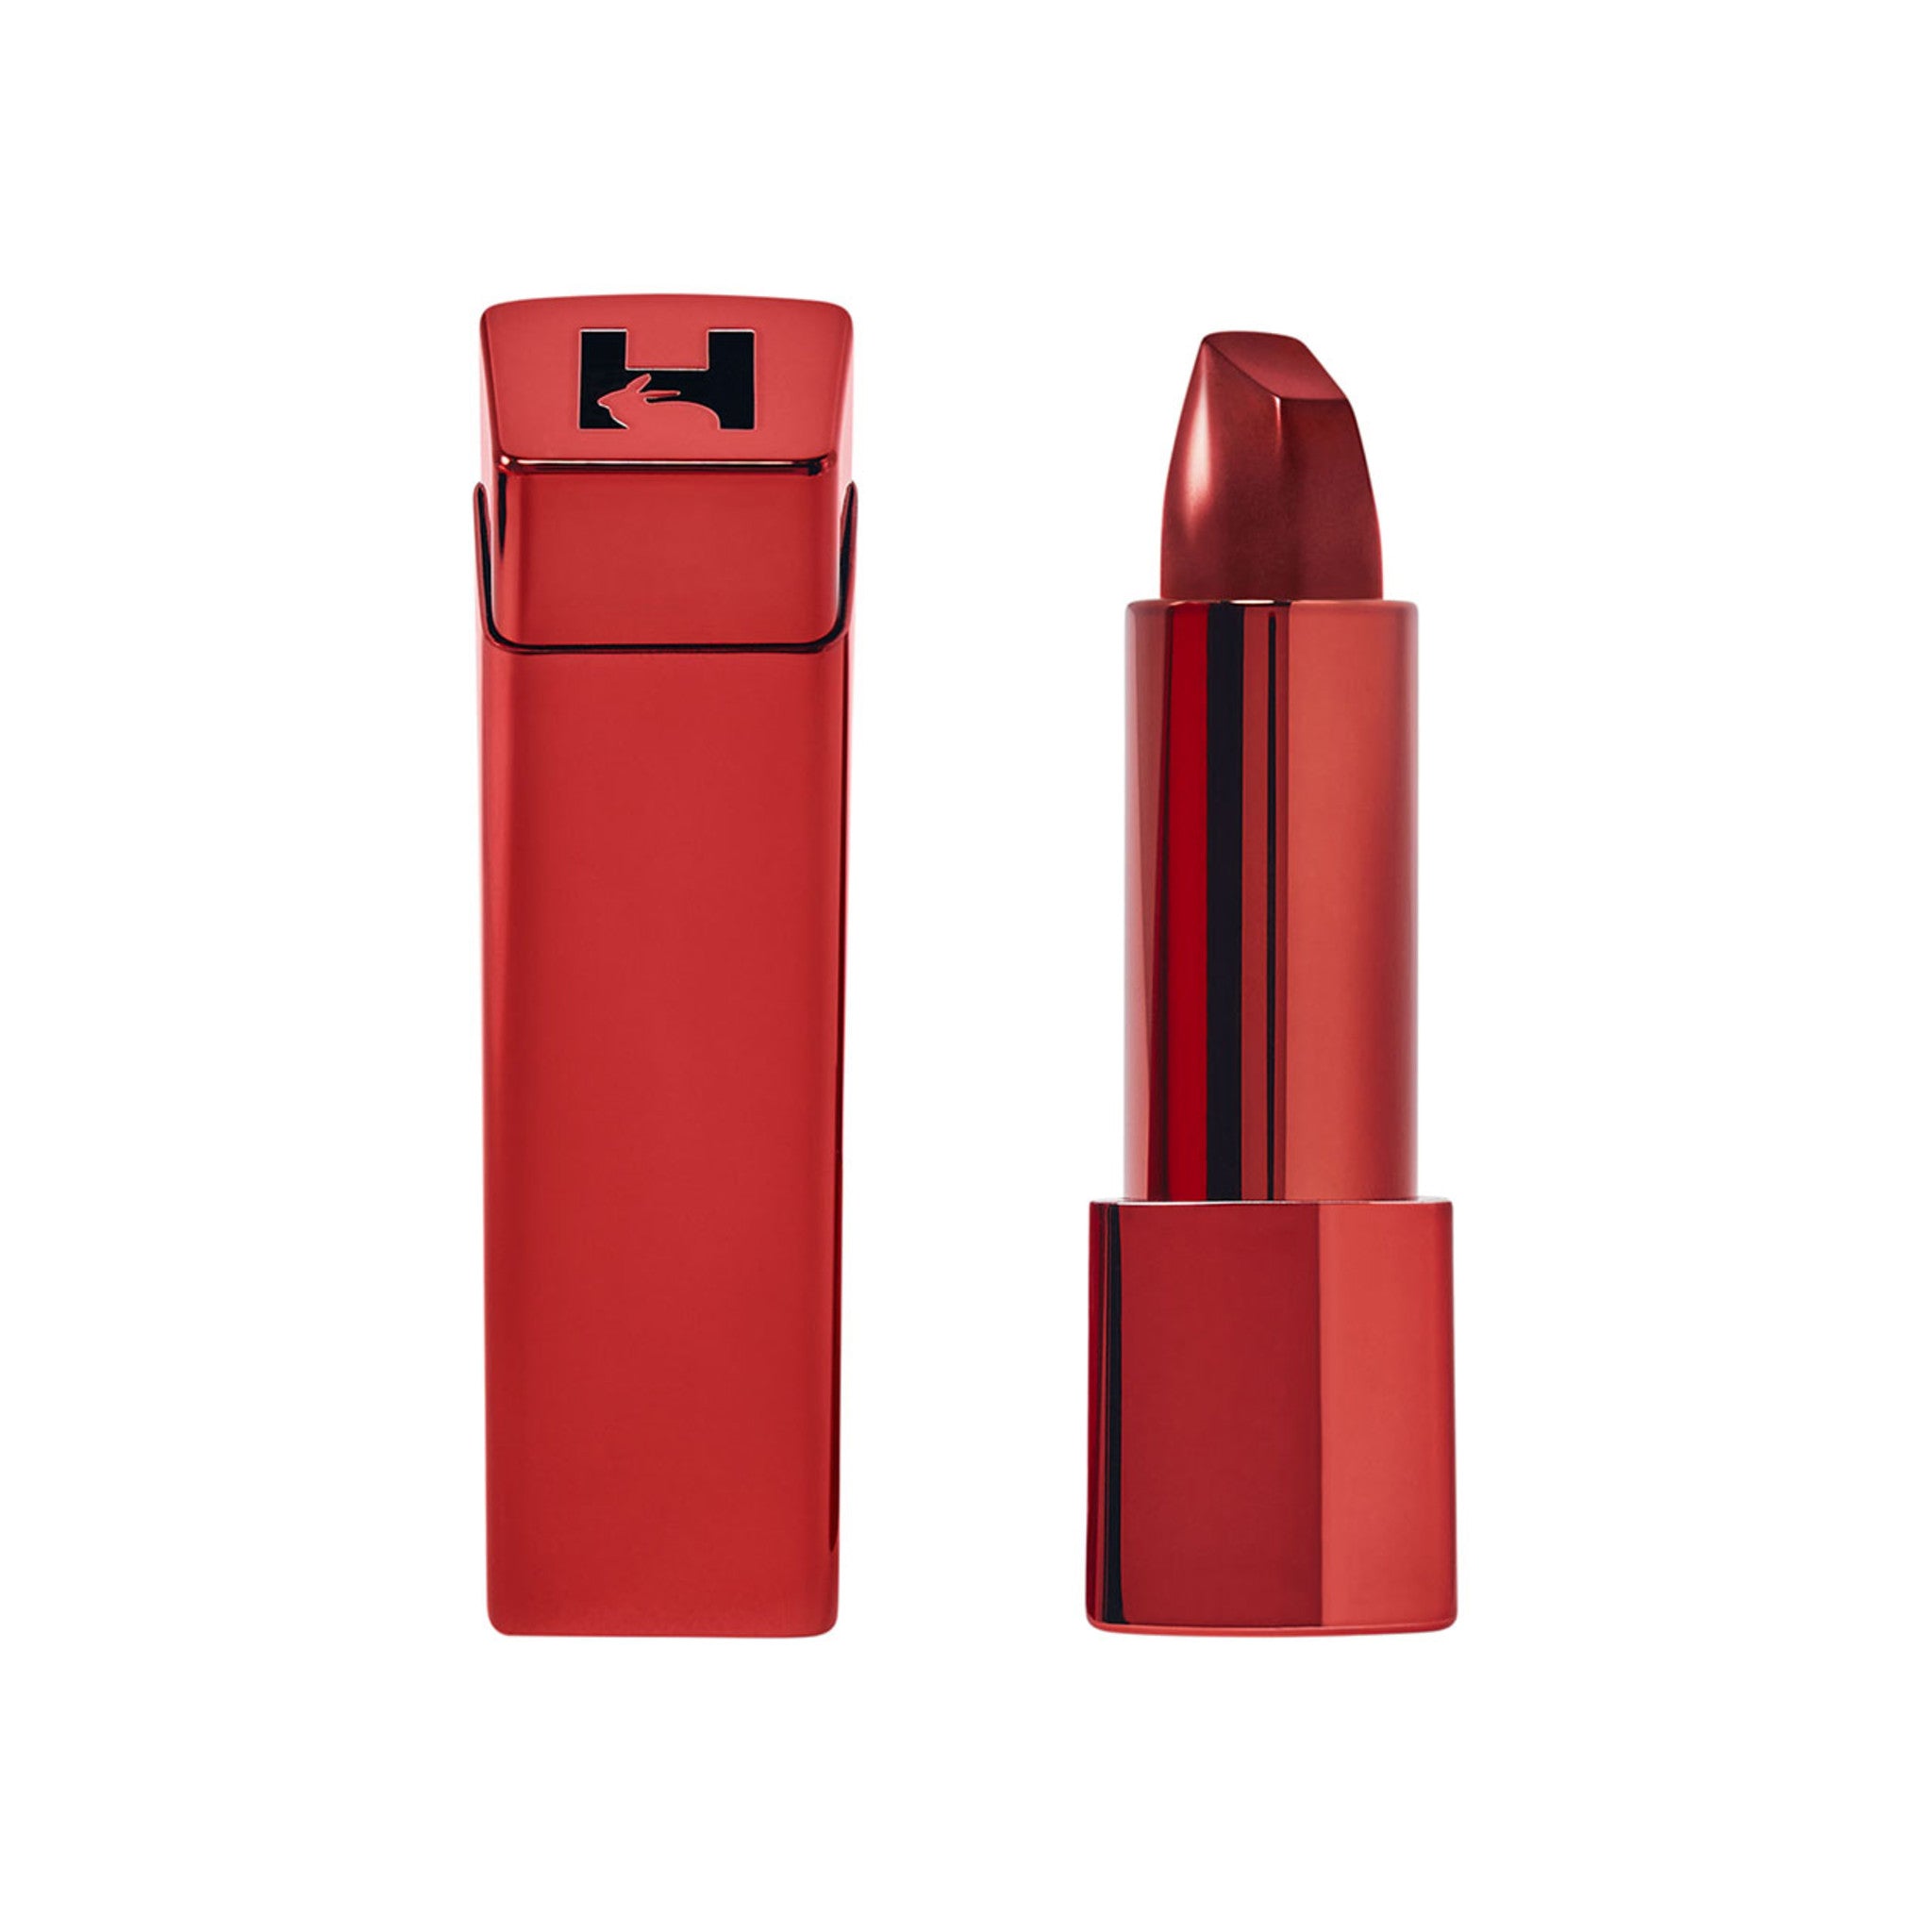 Hourglass Unlocked Satin Crème Lipstick Color/Shade variant: Red 0 main image.